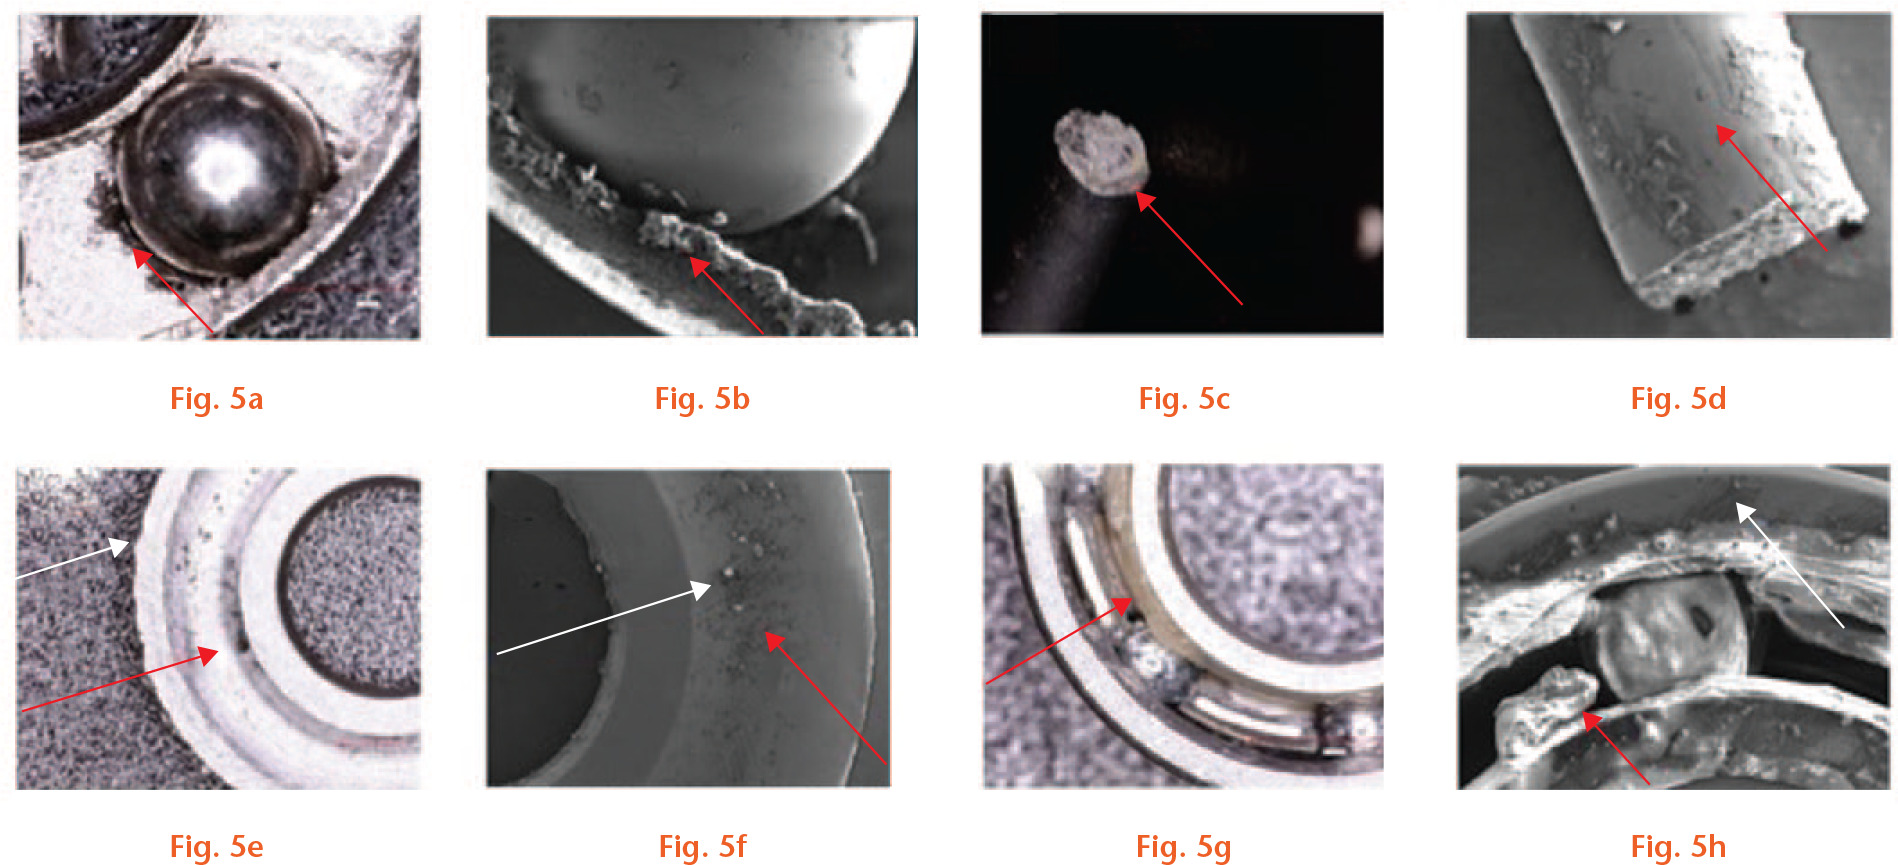  
            Microscopic inspection of internal parts of early P1 design. a) Microscopic picture of the ball bearing where black debris was found (arrow). b) Scanning electron microscopy (SEM) with presence of foreign materials on the ball bearing (arrow). c) Fractured site of the pin (arrow) showing a brittle fracture with no evident initiation or end points of the crack. d) SEM showed the rough surface of the fracture, combined with black debris on the side of the actuator pin (arrow). e) Black deposits on the plain bearings (red arrow) and fretting more prominent on the exterior part of the bearing (white arrow). f) SEM revealed black debris (red arrow) and biological material (fluorescent debris, indicated by the white arrow). g) The ball bearing previously situated at the bottom of the gearbox had a fat-like substance (arrow), most likely lubricant to facilitate motion within the internal mechanism. h) SEM confirmed the presence of fat-like substance (red arrow) and black debris (white arrow).
          